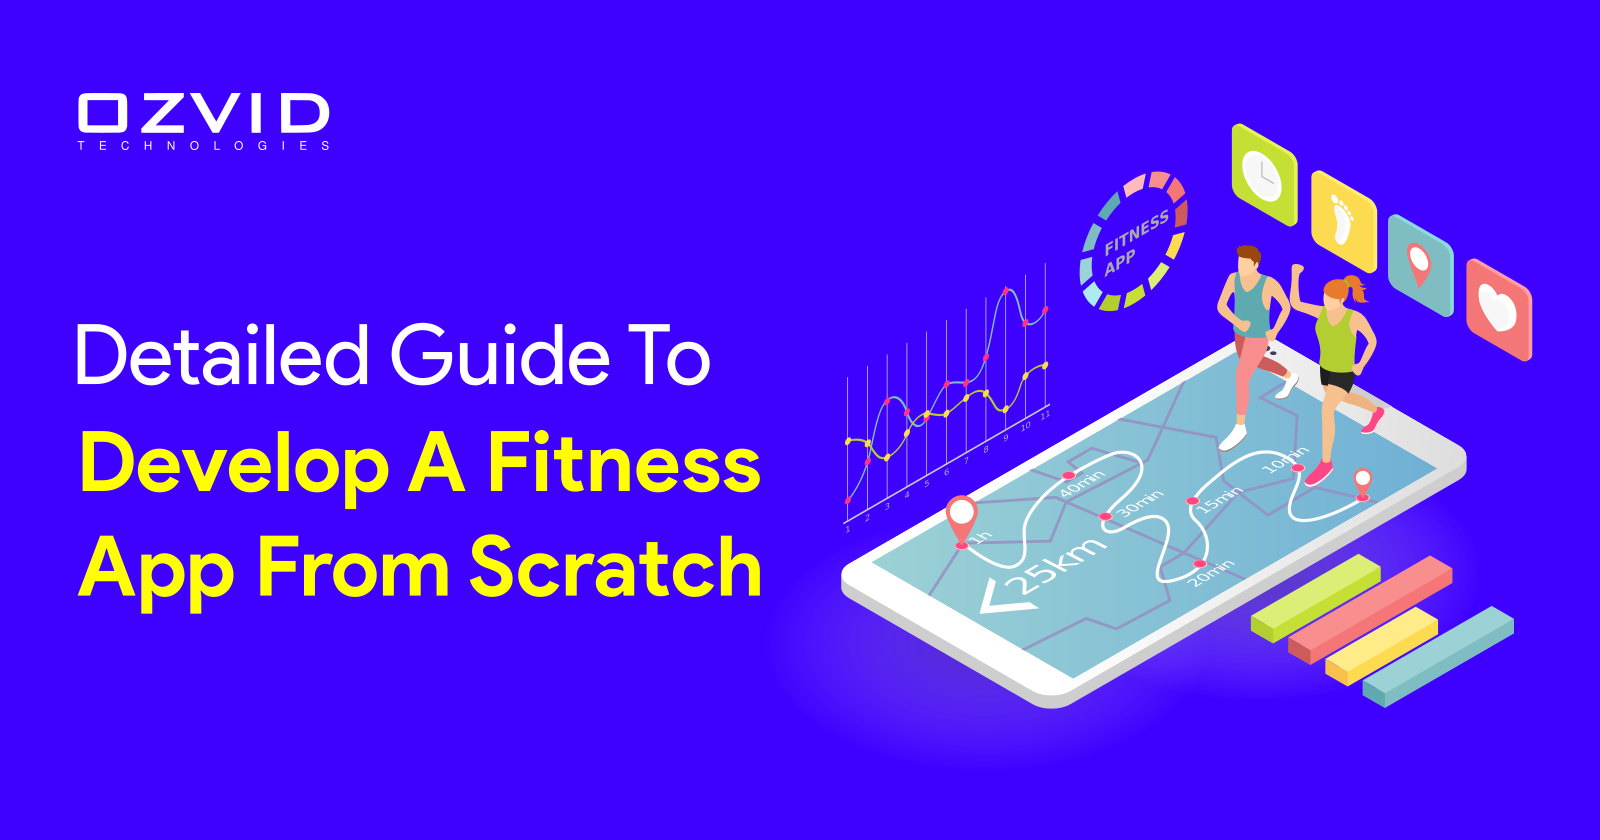 Detailed Guide To Develop A Fitness App From Scratch